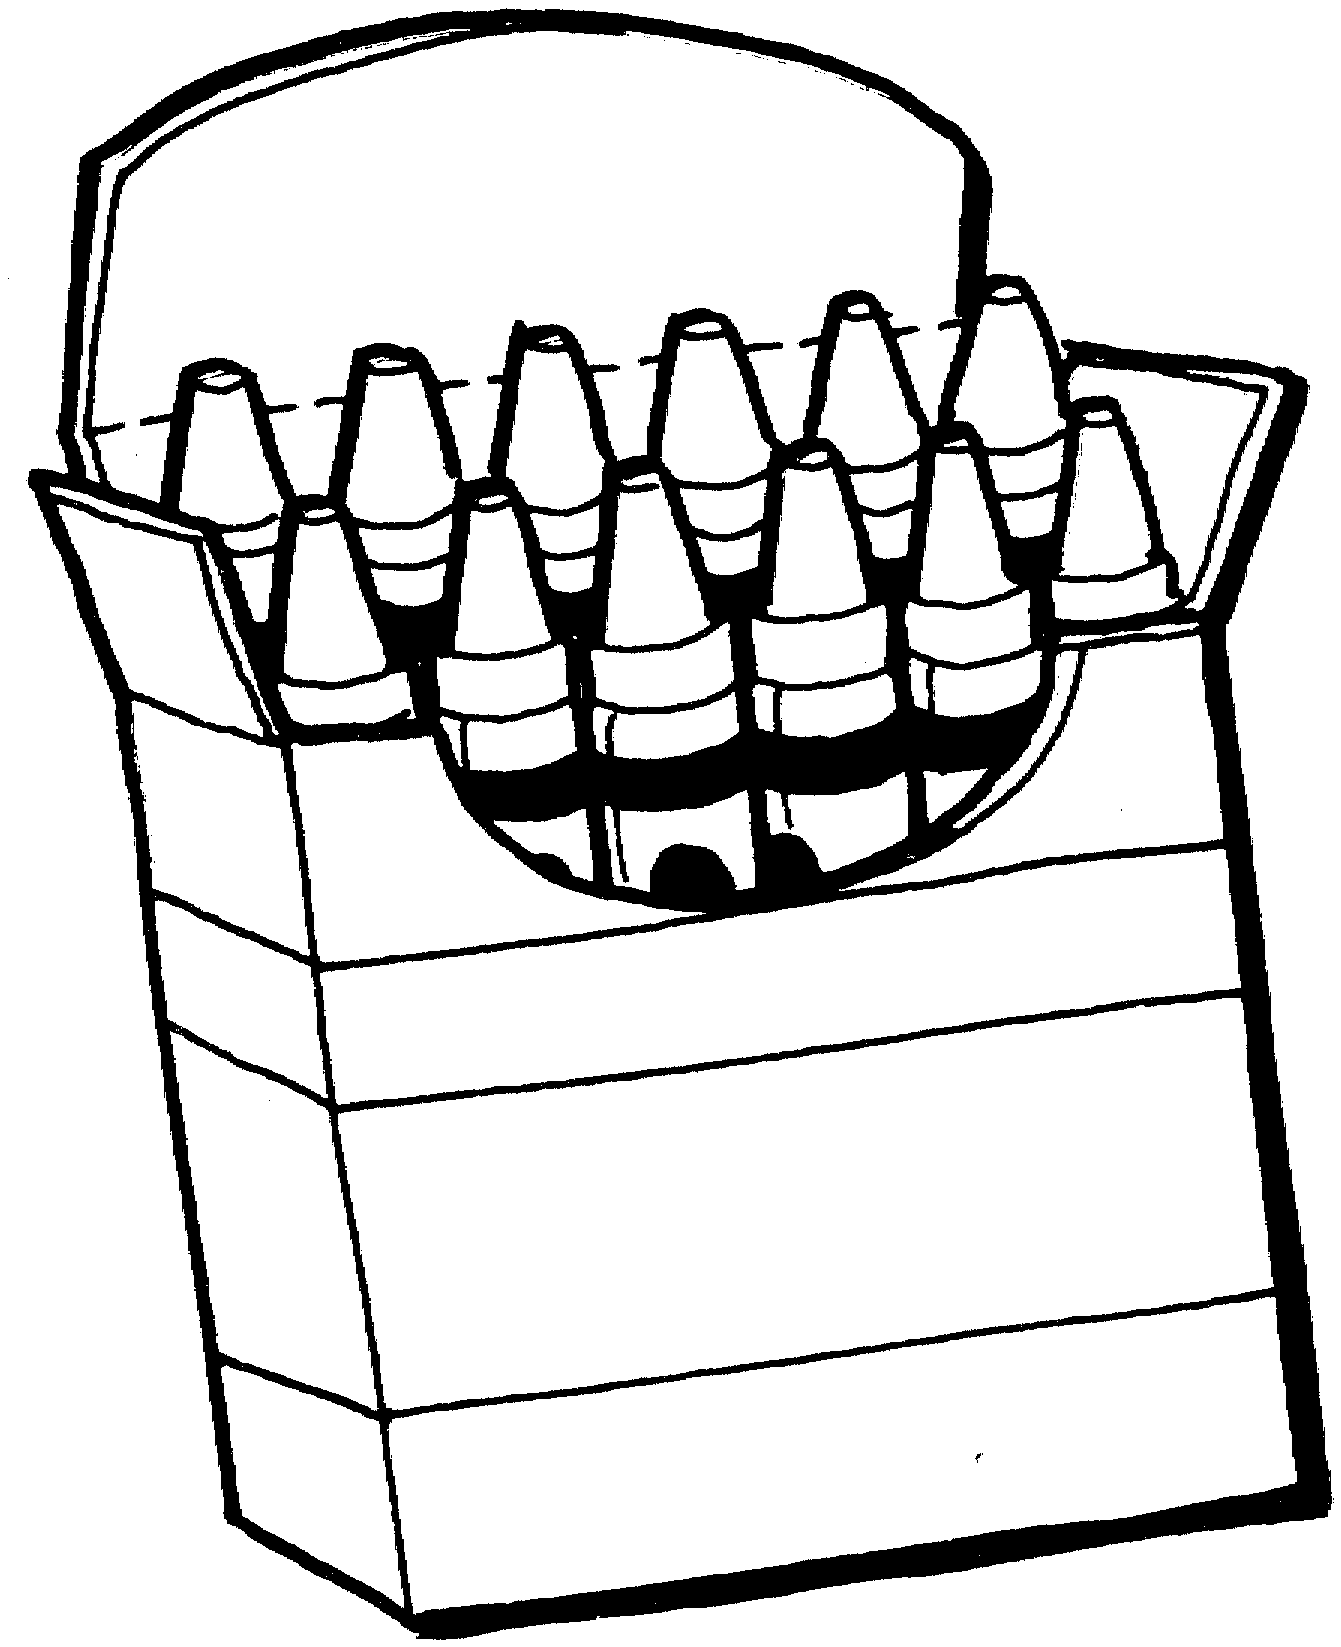 crayon clipart black and white